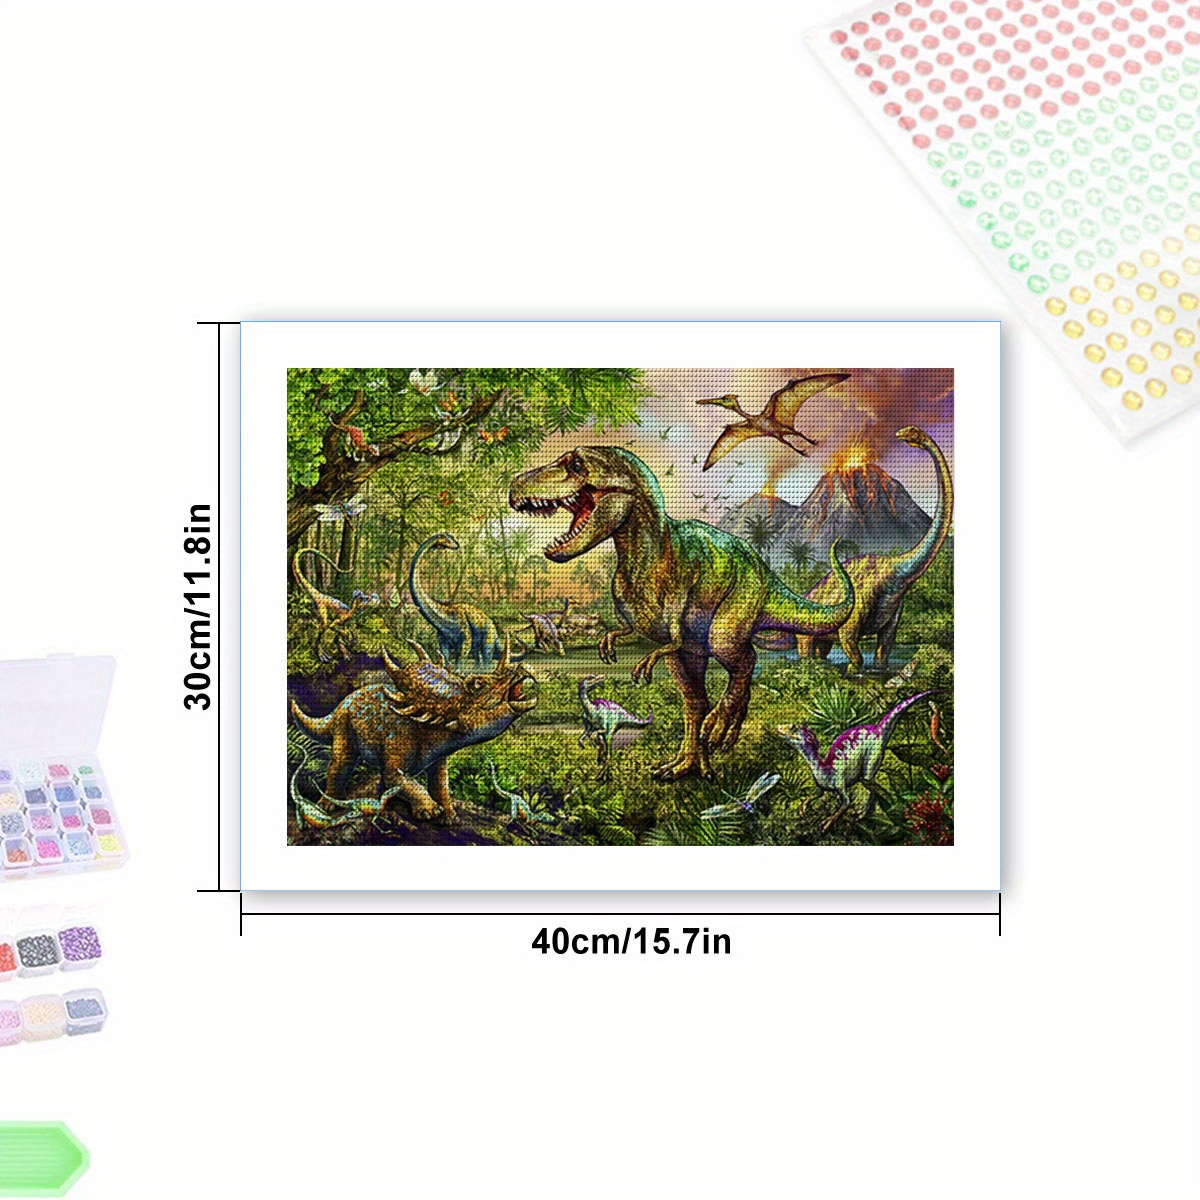 Domineering Dinosaur Diamond Painting Kits Tools For Adults 5D DIY  Artificial Diamond Art Tools For Beginners With Round Full Drill Diamond  Gems Paint